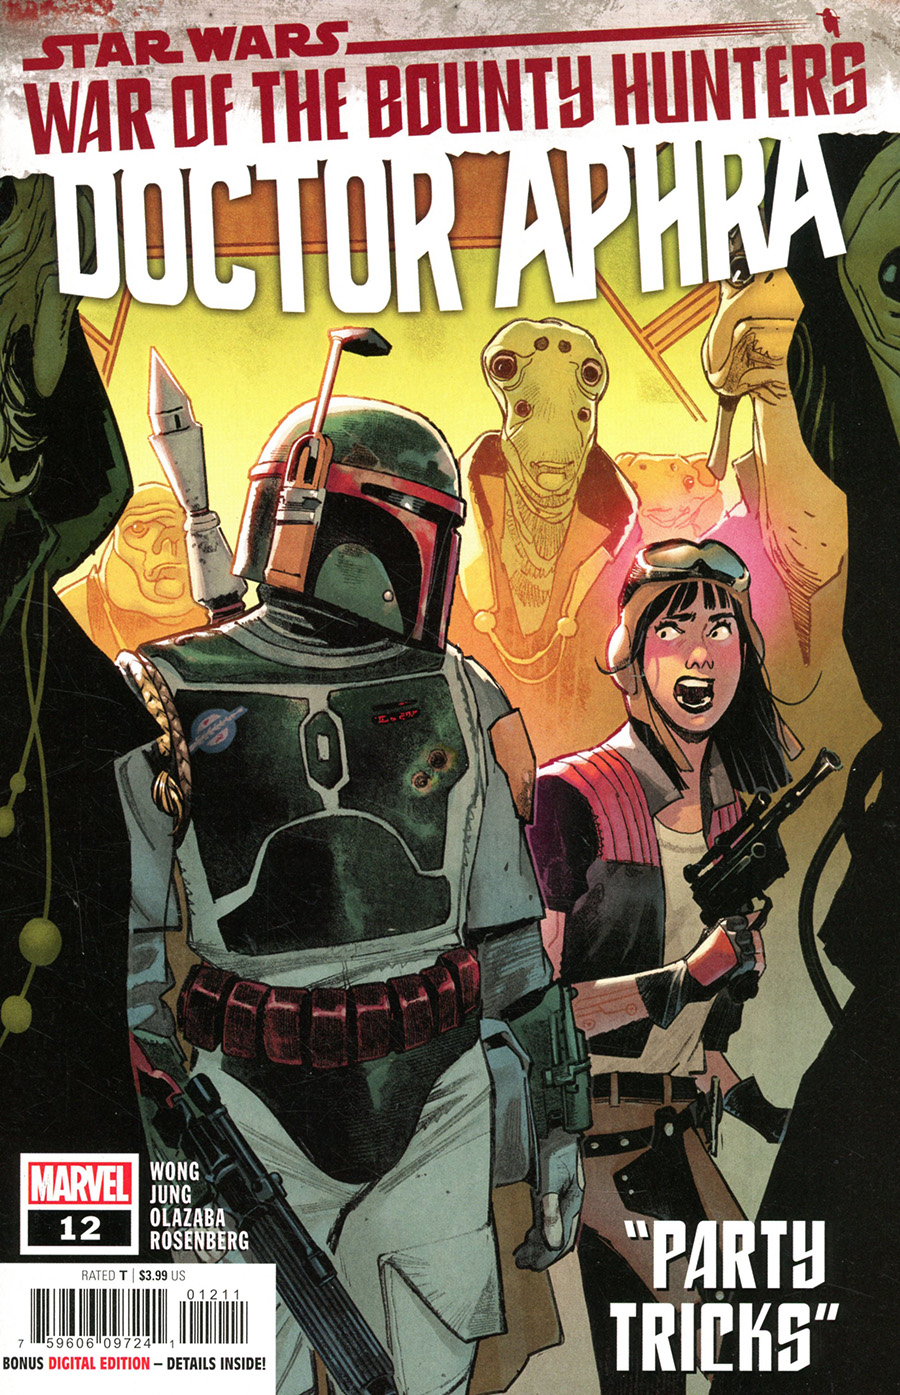 Star Wars Doctor Aphra Vol 2 #12 Cover A Regular Sara Pichelli Cover (War Of The Bounty Hunters Tie-In)